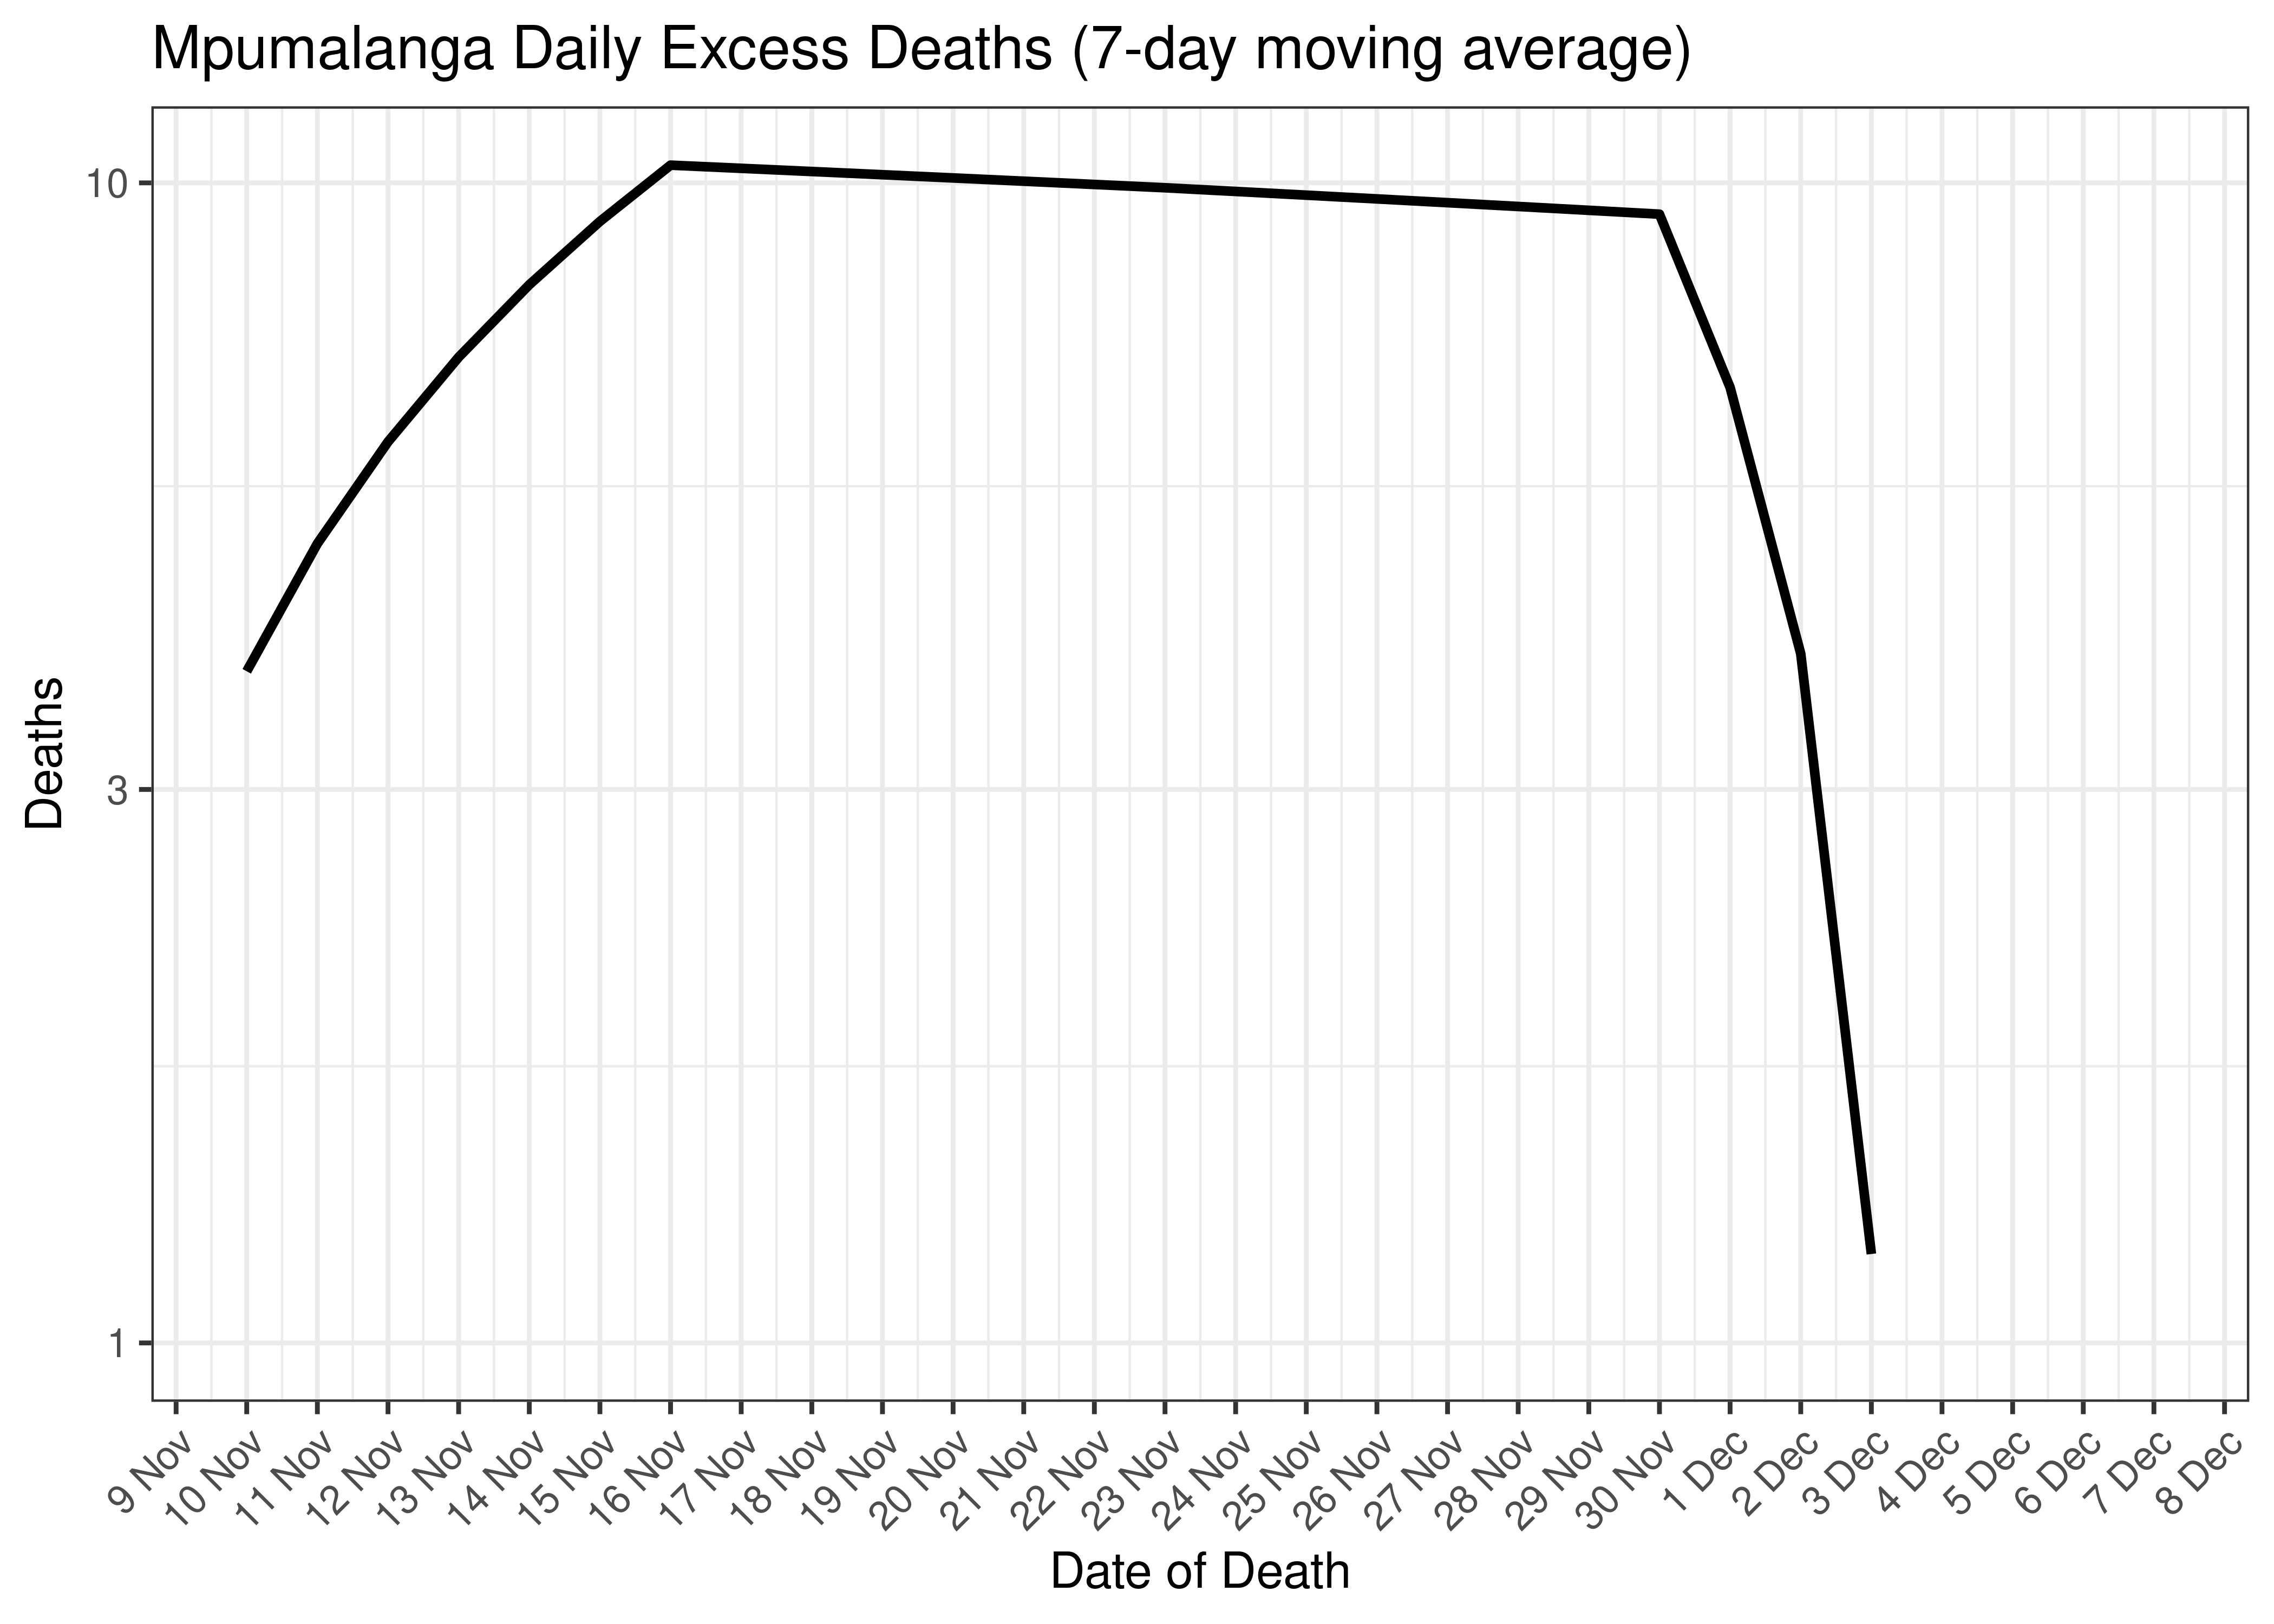 Mpumalanga Daily Excess Deaths for Last 30-days (7-day moving average)